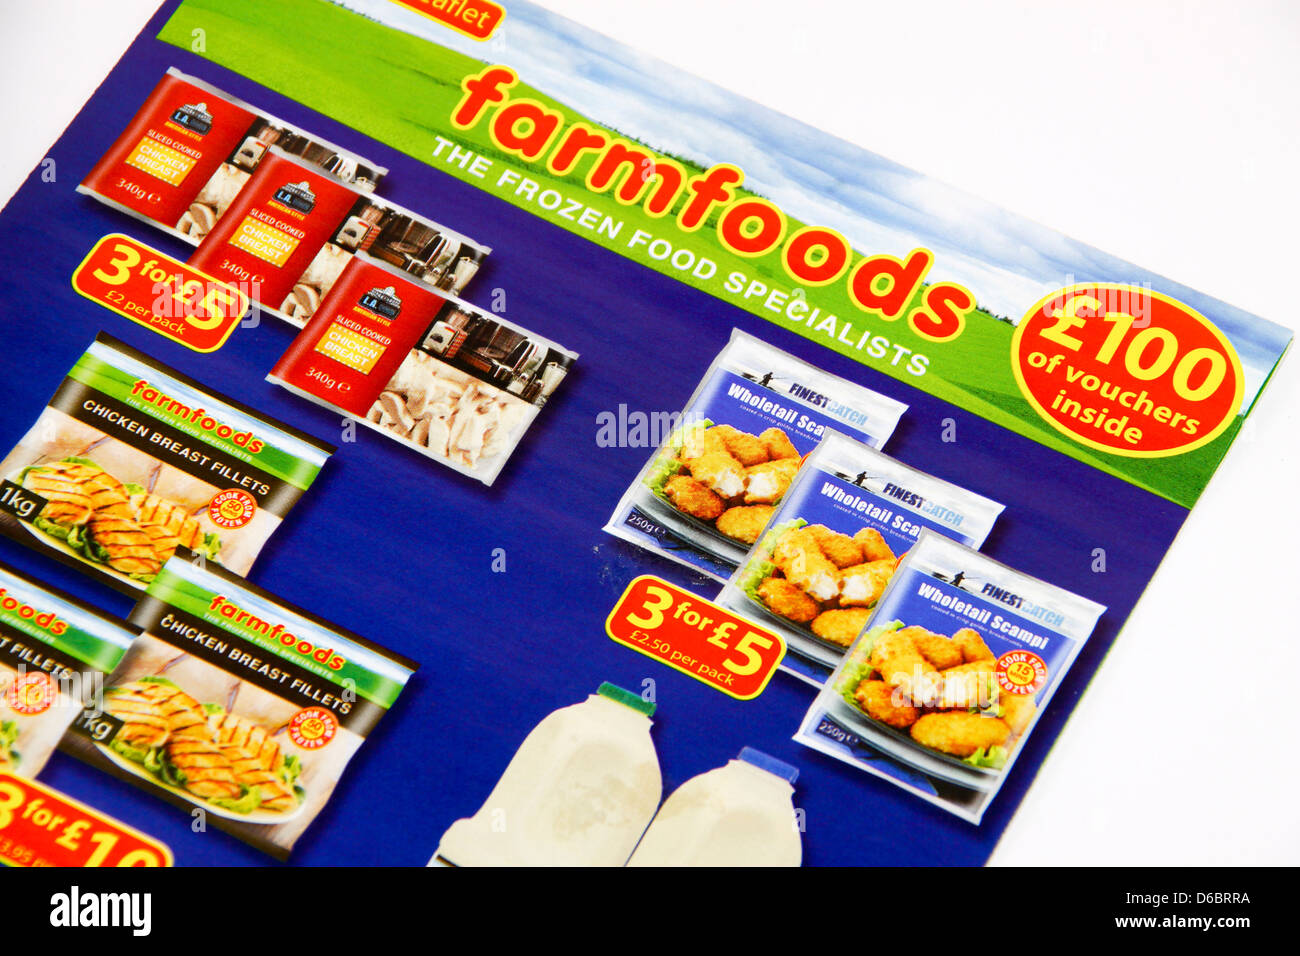 Farmfoods frozen food promotional mailing Stock Photo